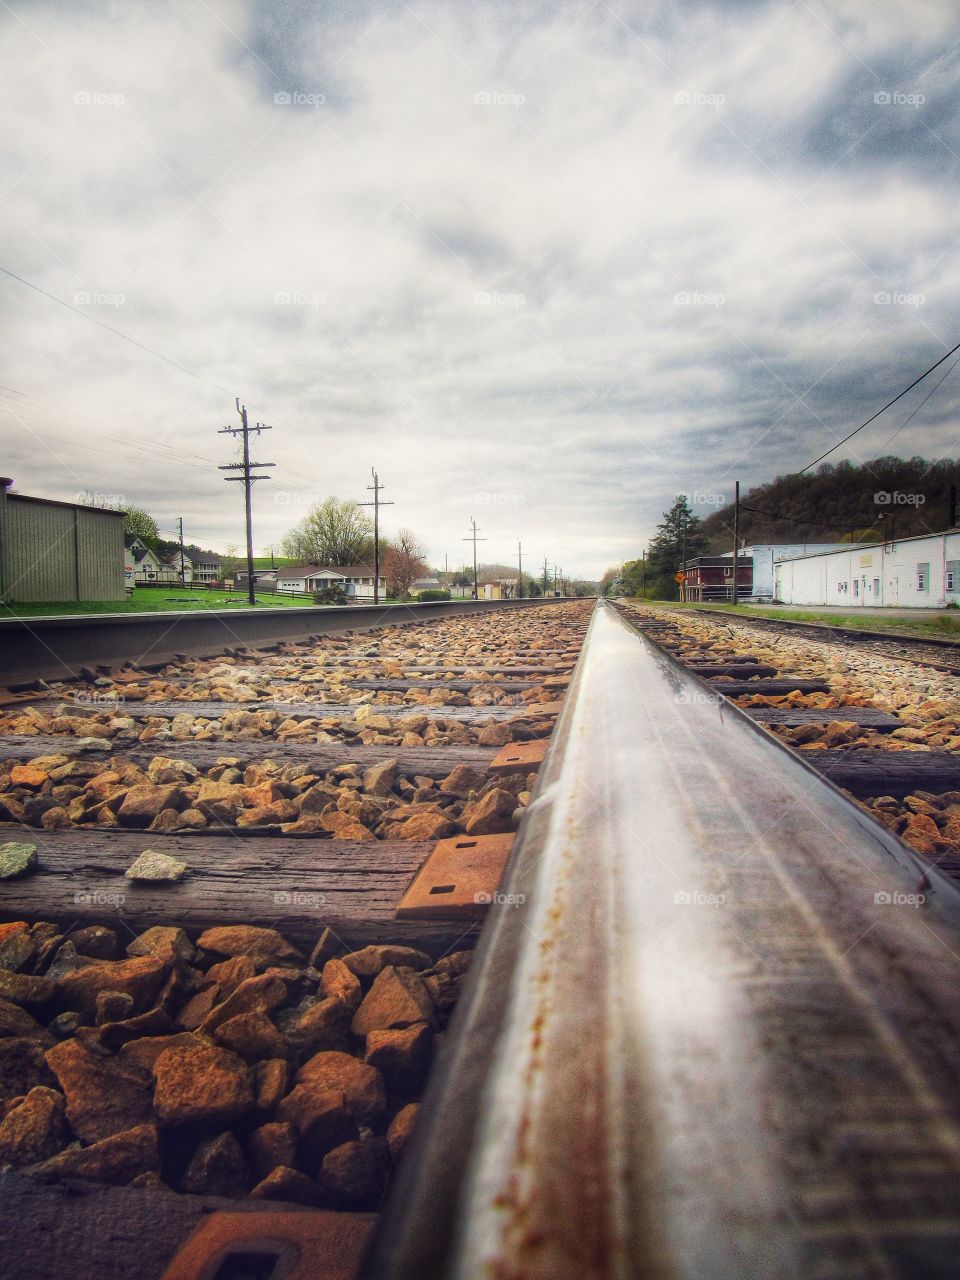 Old Train Stop in my town, old rustic train tracks on a cloudy rainy day